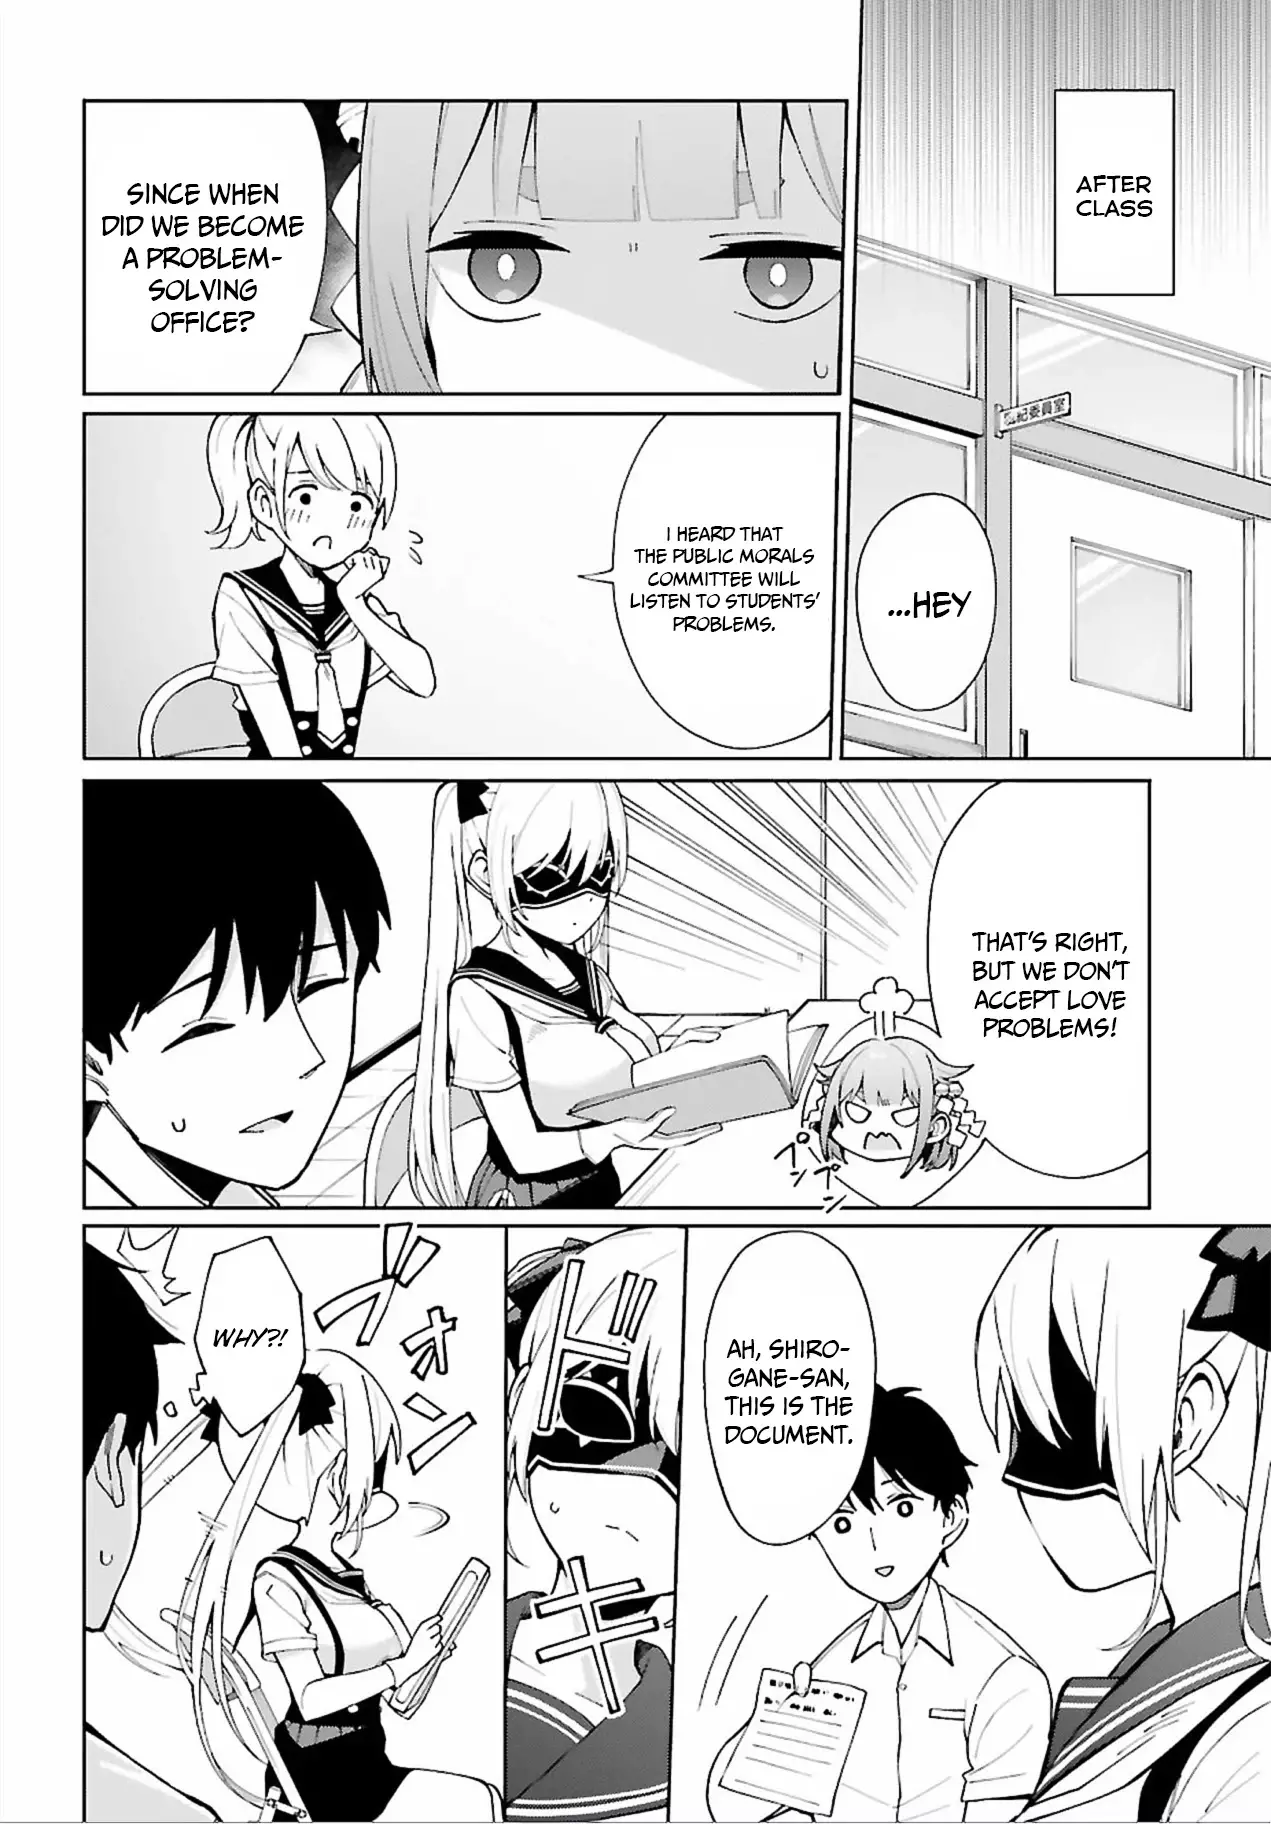 I Don't Understand Shirogane-San's Facial Expression At All - 6 page 17